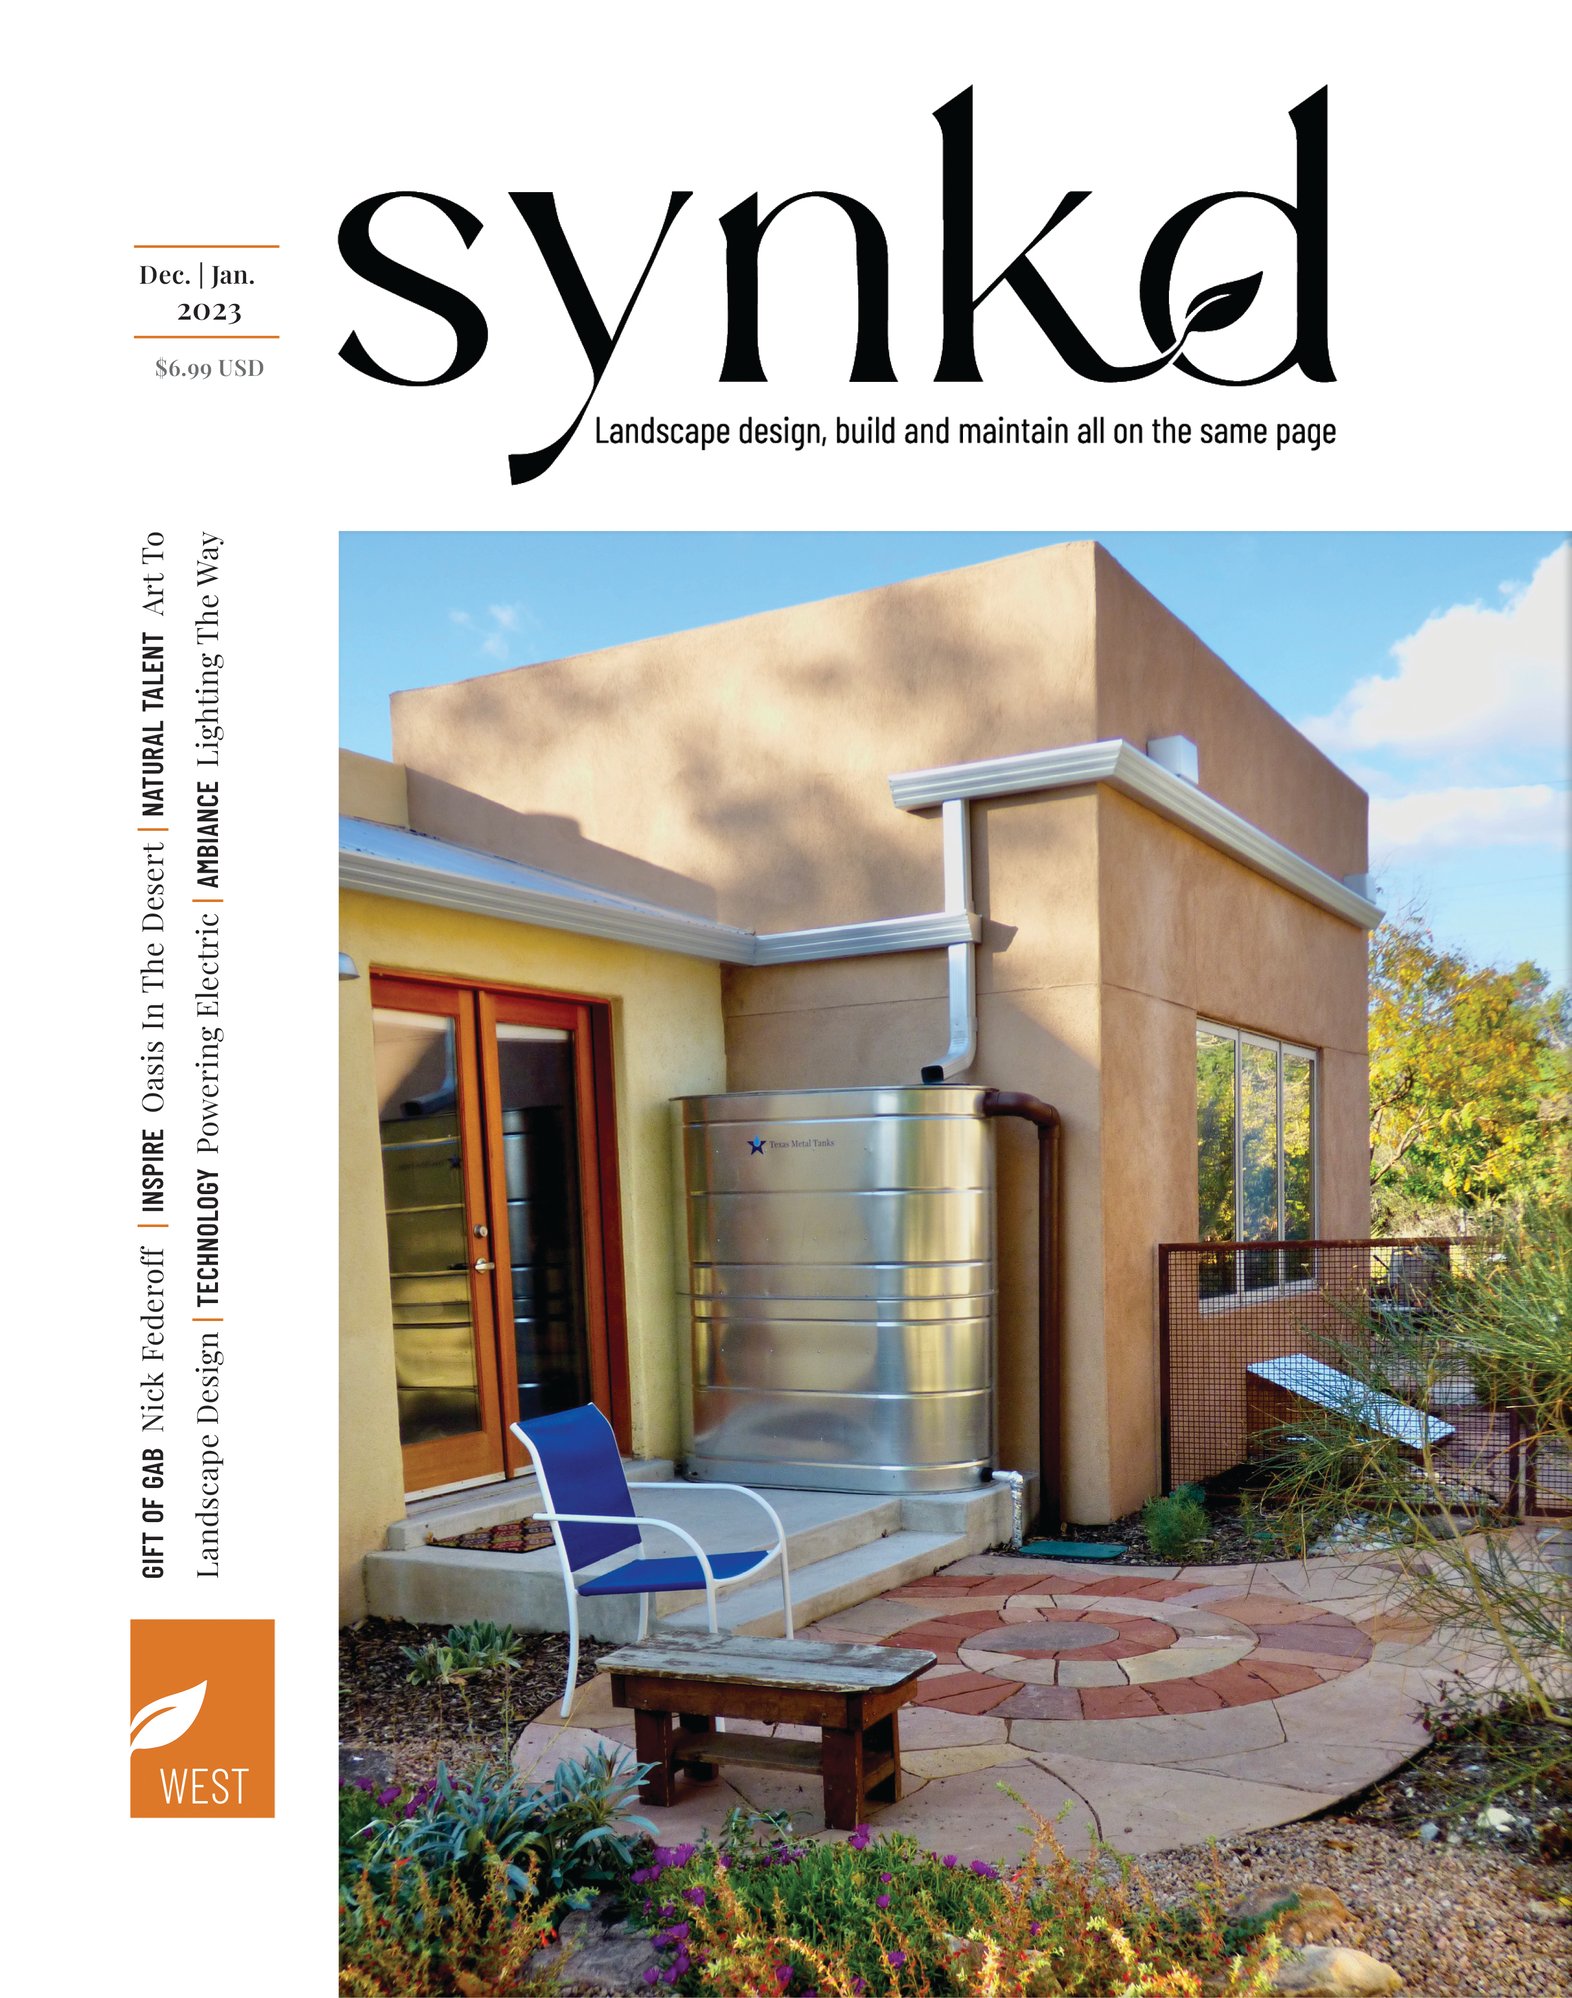 The second issue of SYNKD West published in December/January 2023 features WaterWise's office project featuring native plants and water cisterns